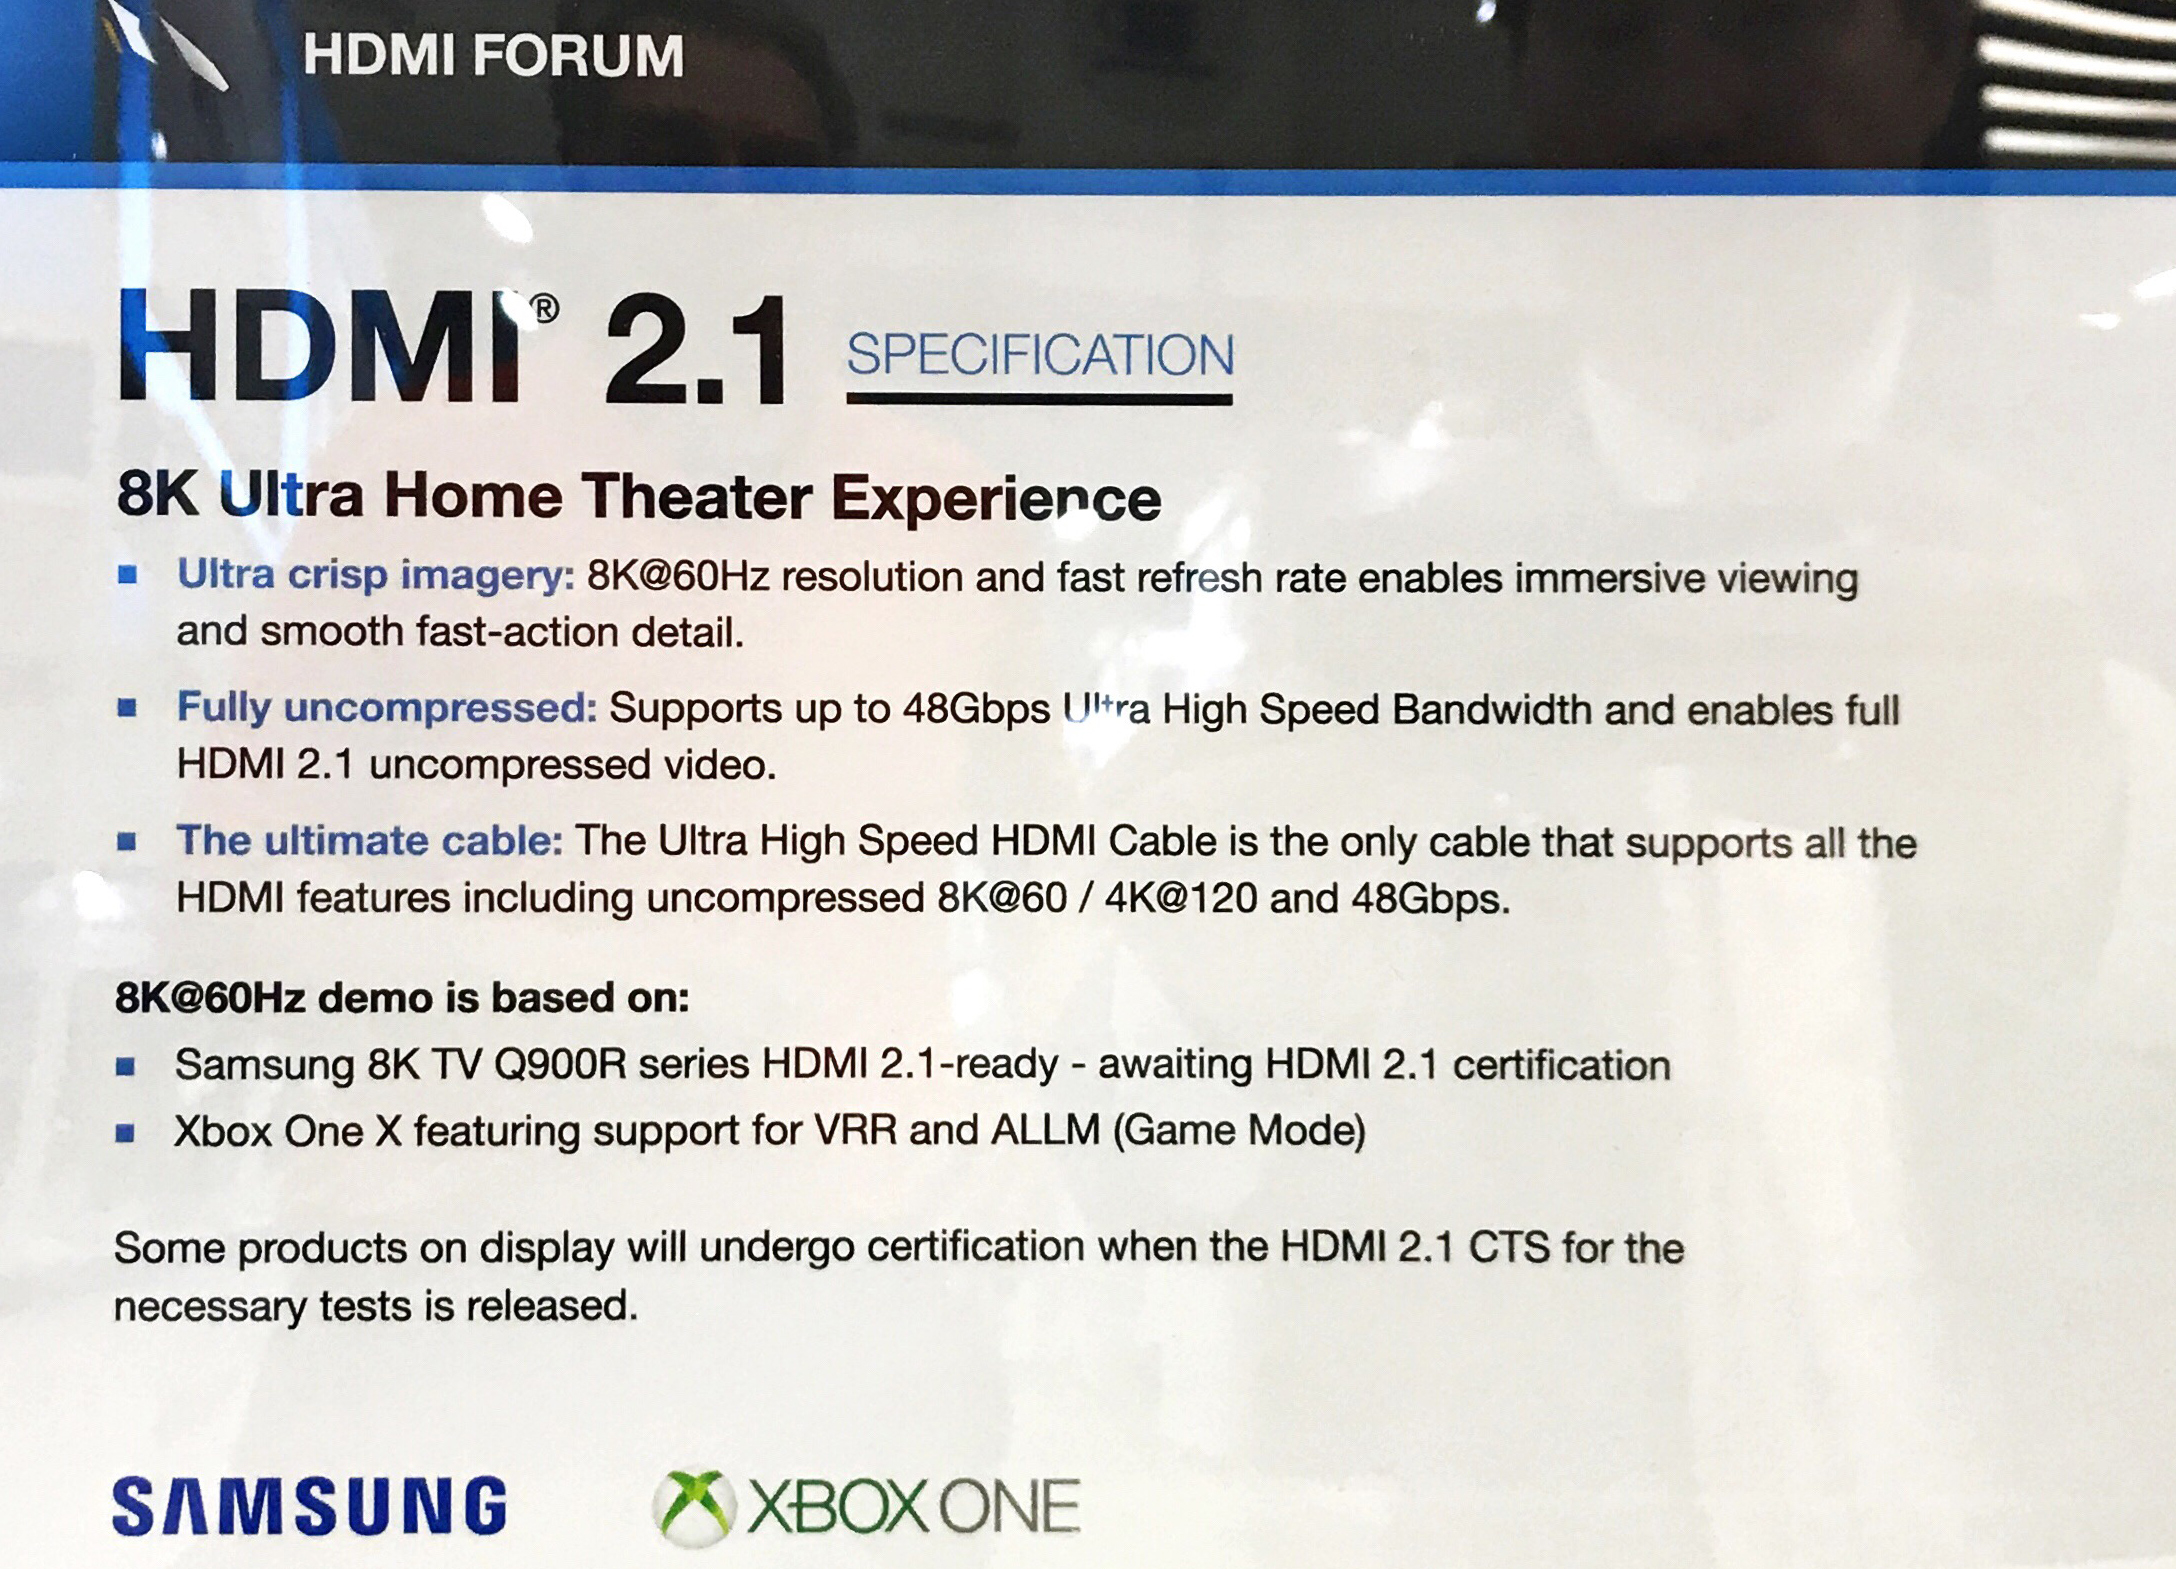 HDMI Forum: Certification Program for Ultra High Speed HDMI Incoming